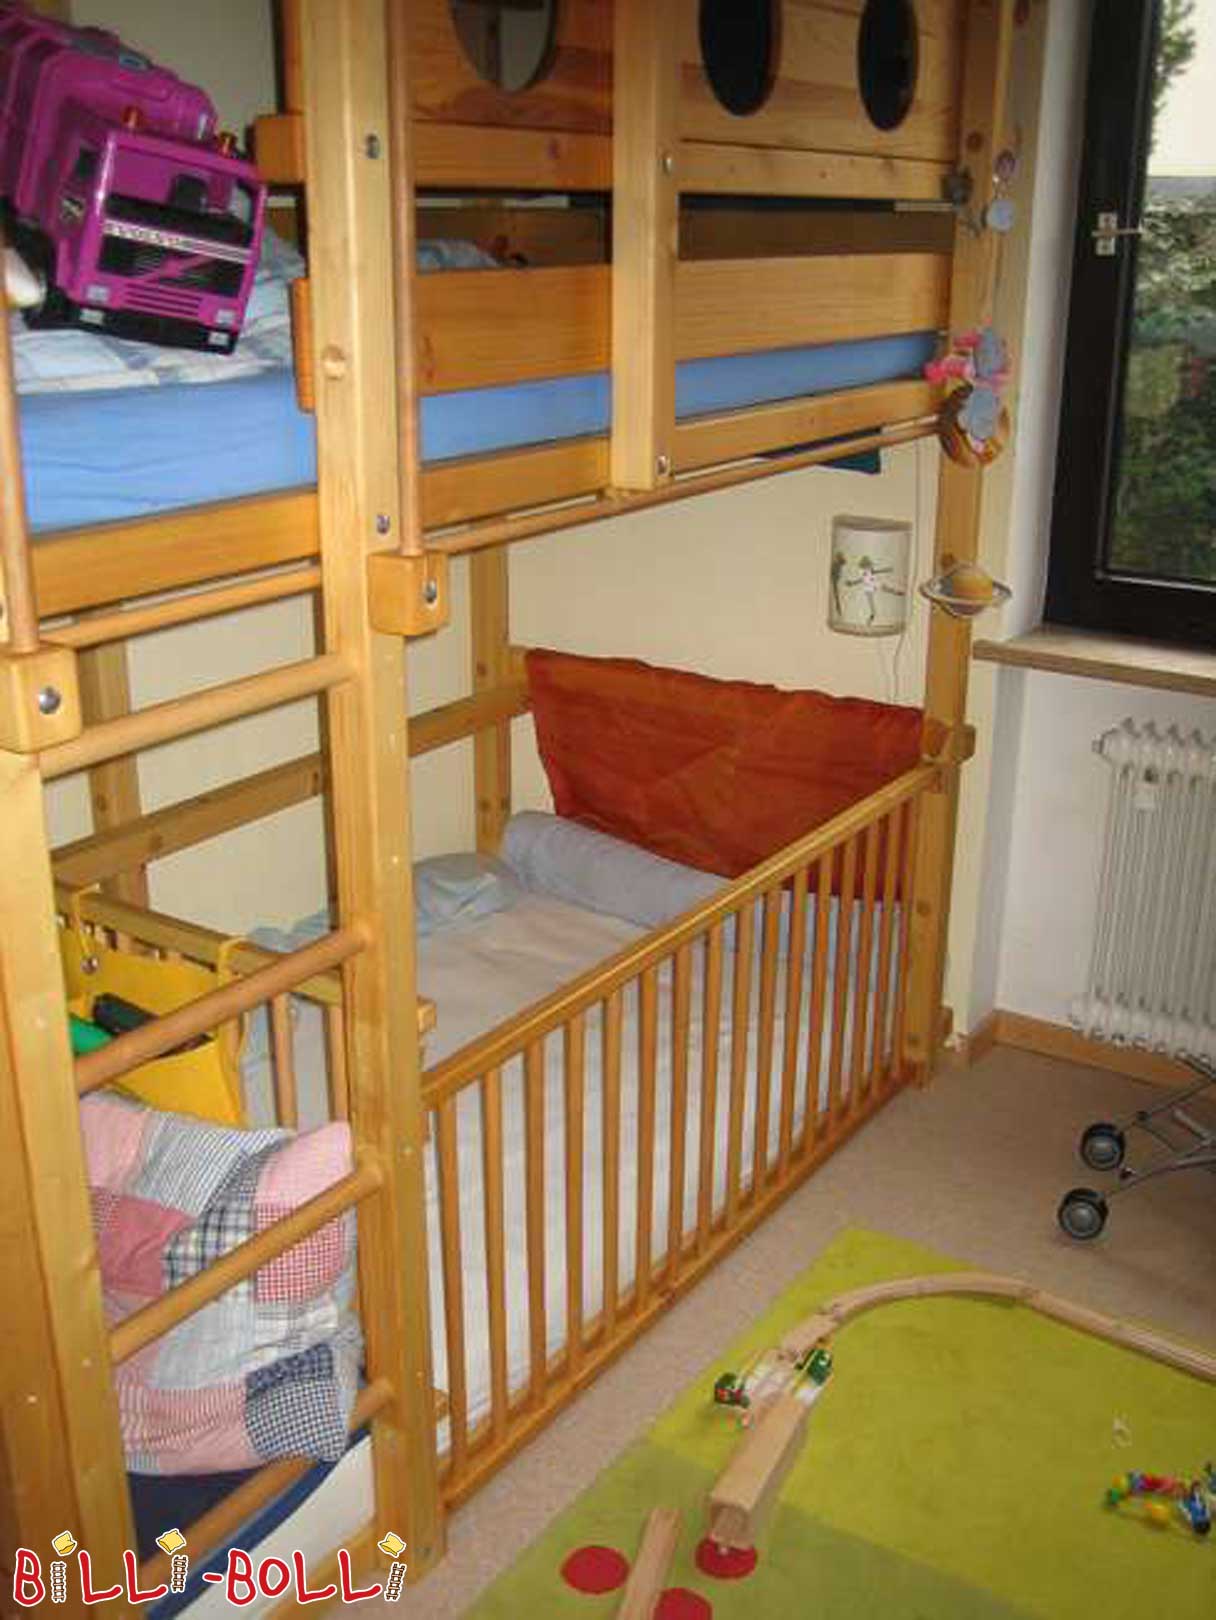 3/4 grid (Category: second hand kids’ furniture)